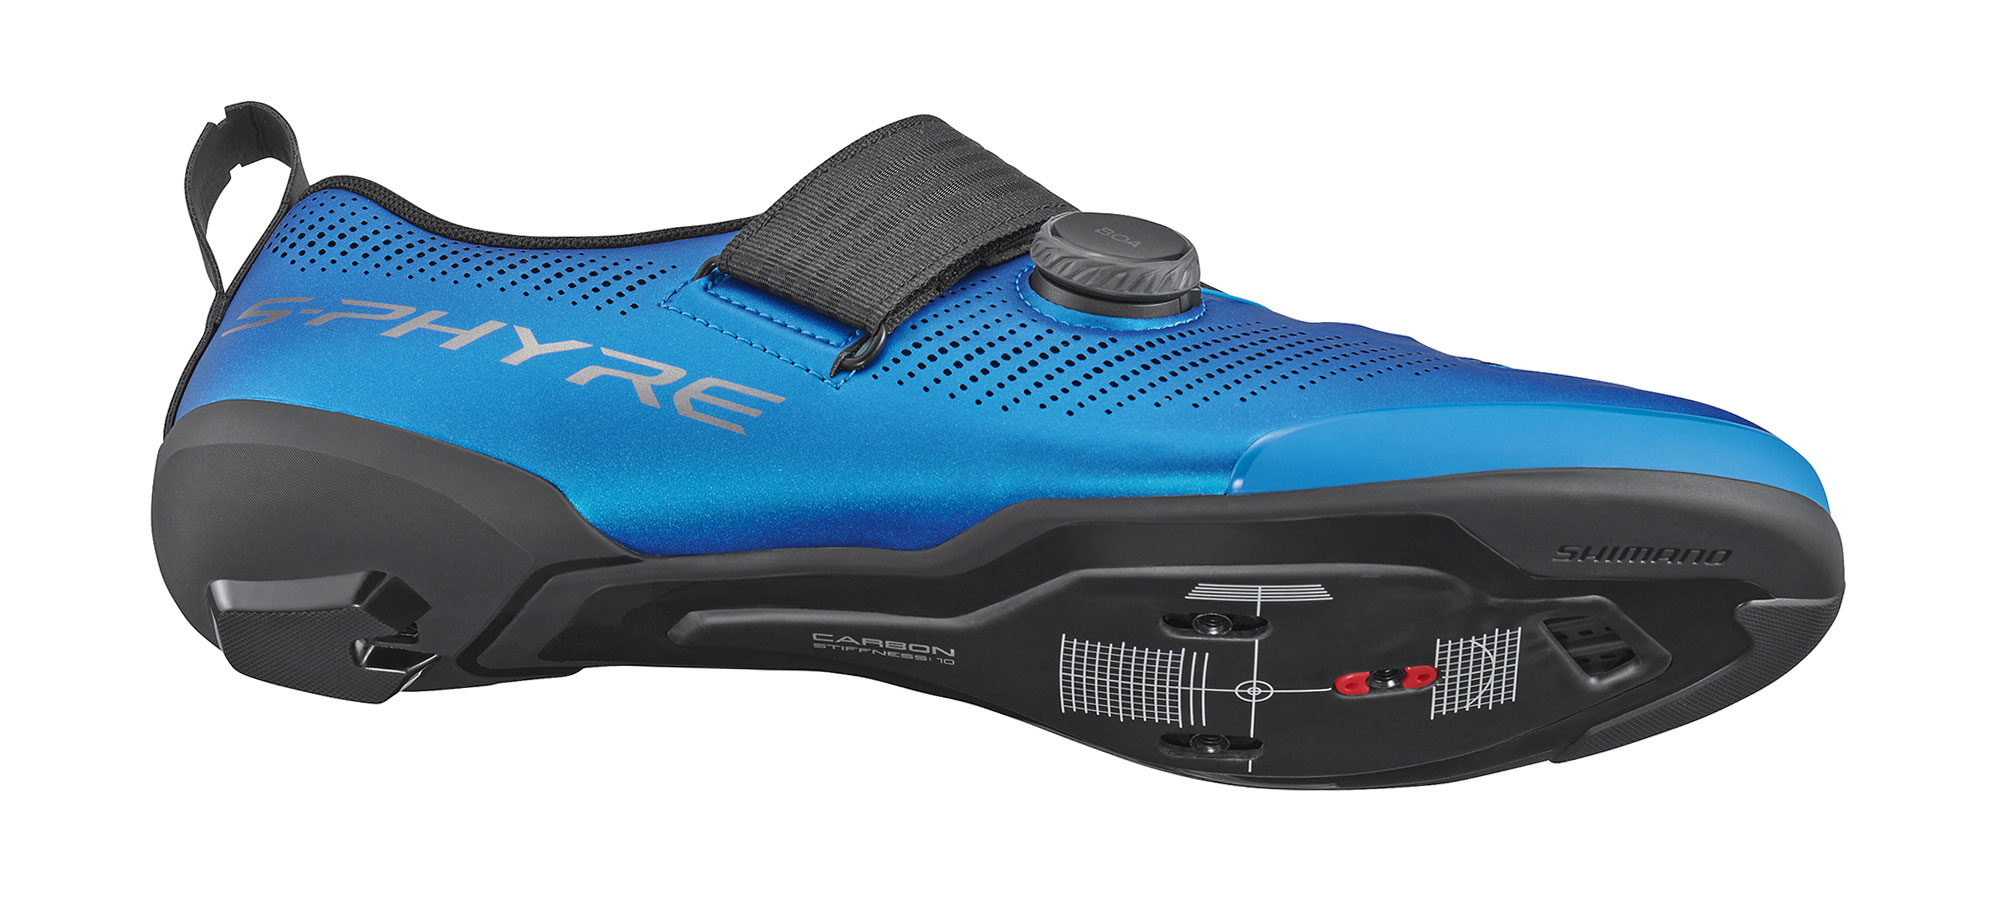 All-new Shimano S-Phyre TR9 triathlon shoes, carbon composite sole